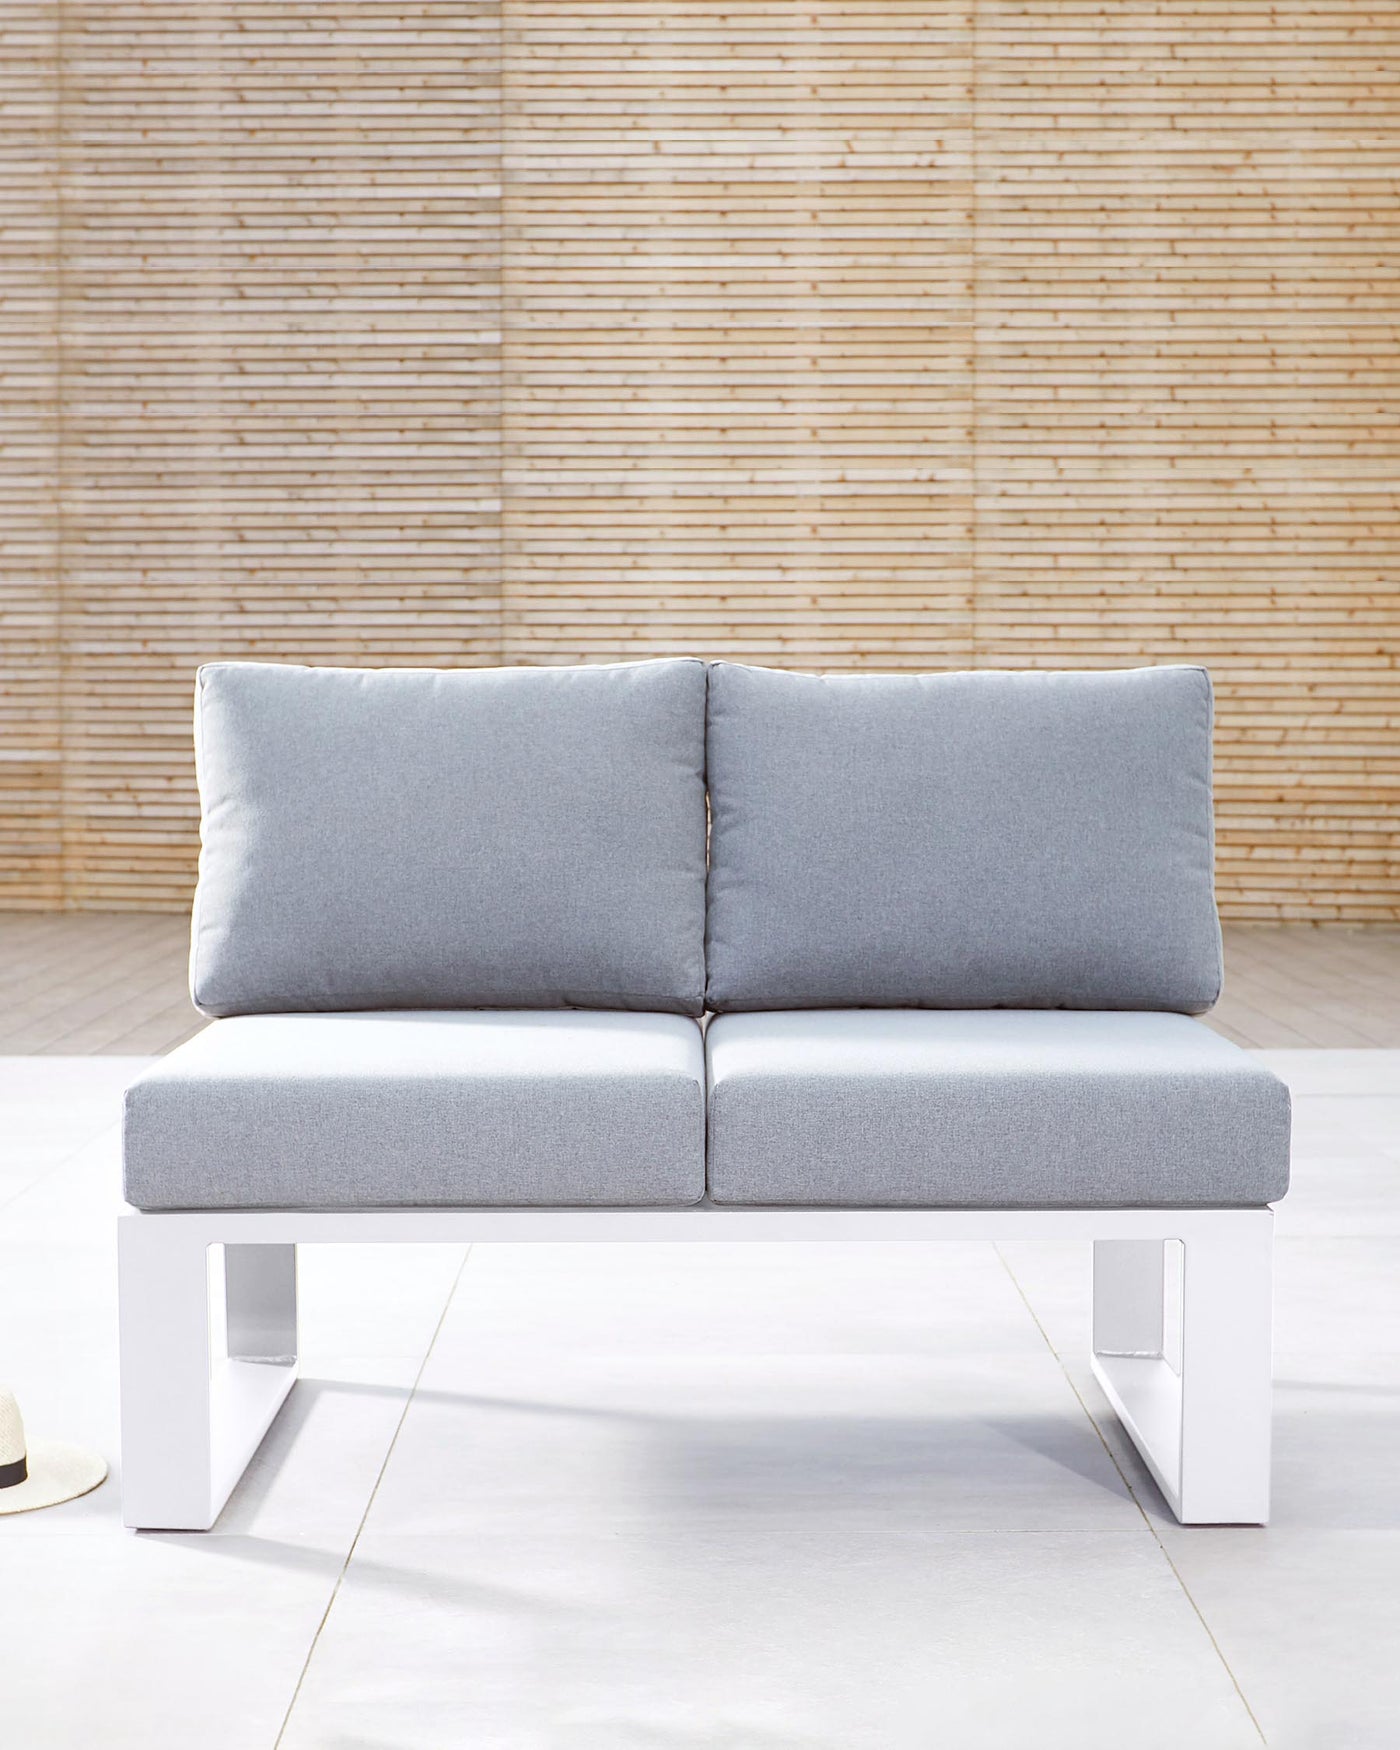 A modern minimalist two-seater sofa with a clean design, featuring a solid white base and light grey cushions. The base has a distinctive U-shaped silhouette that supports a pair of thick, comfortable seat cushions and two backrest cushions, all upholstered in a light grey fabric. The couch is showcased against a textured bamboo wall, suggesting a contemporary and natural ambiance.